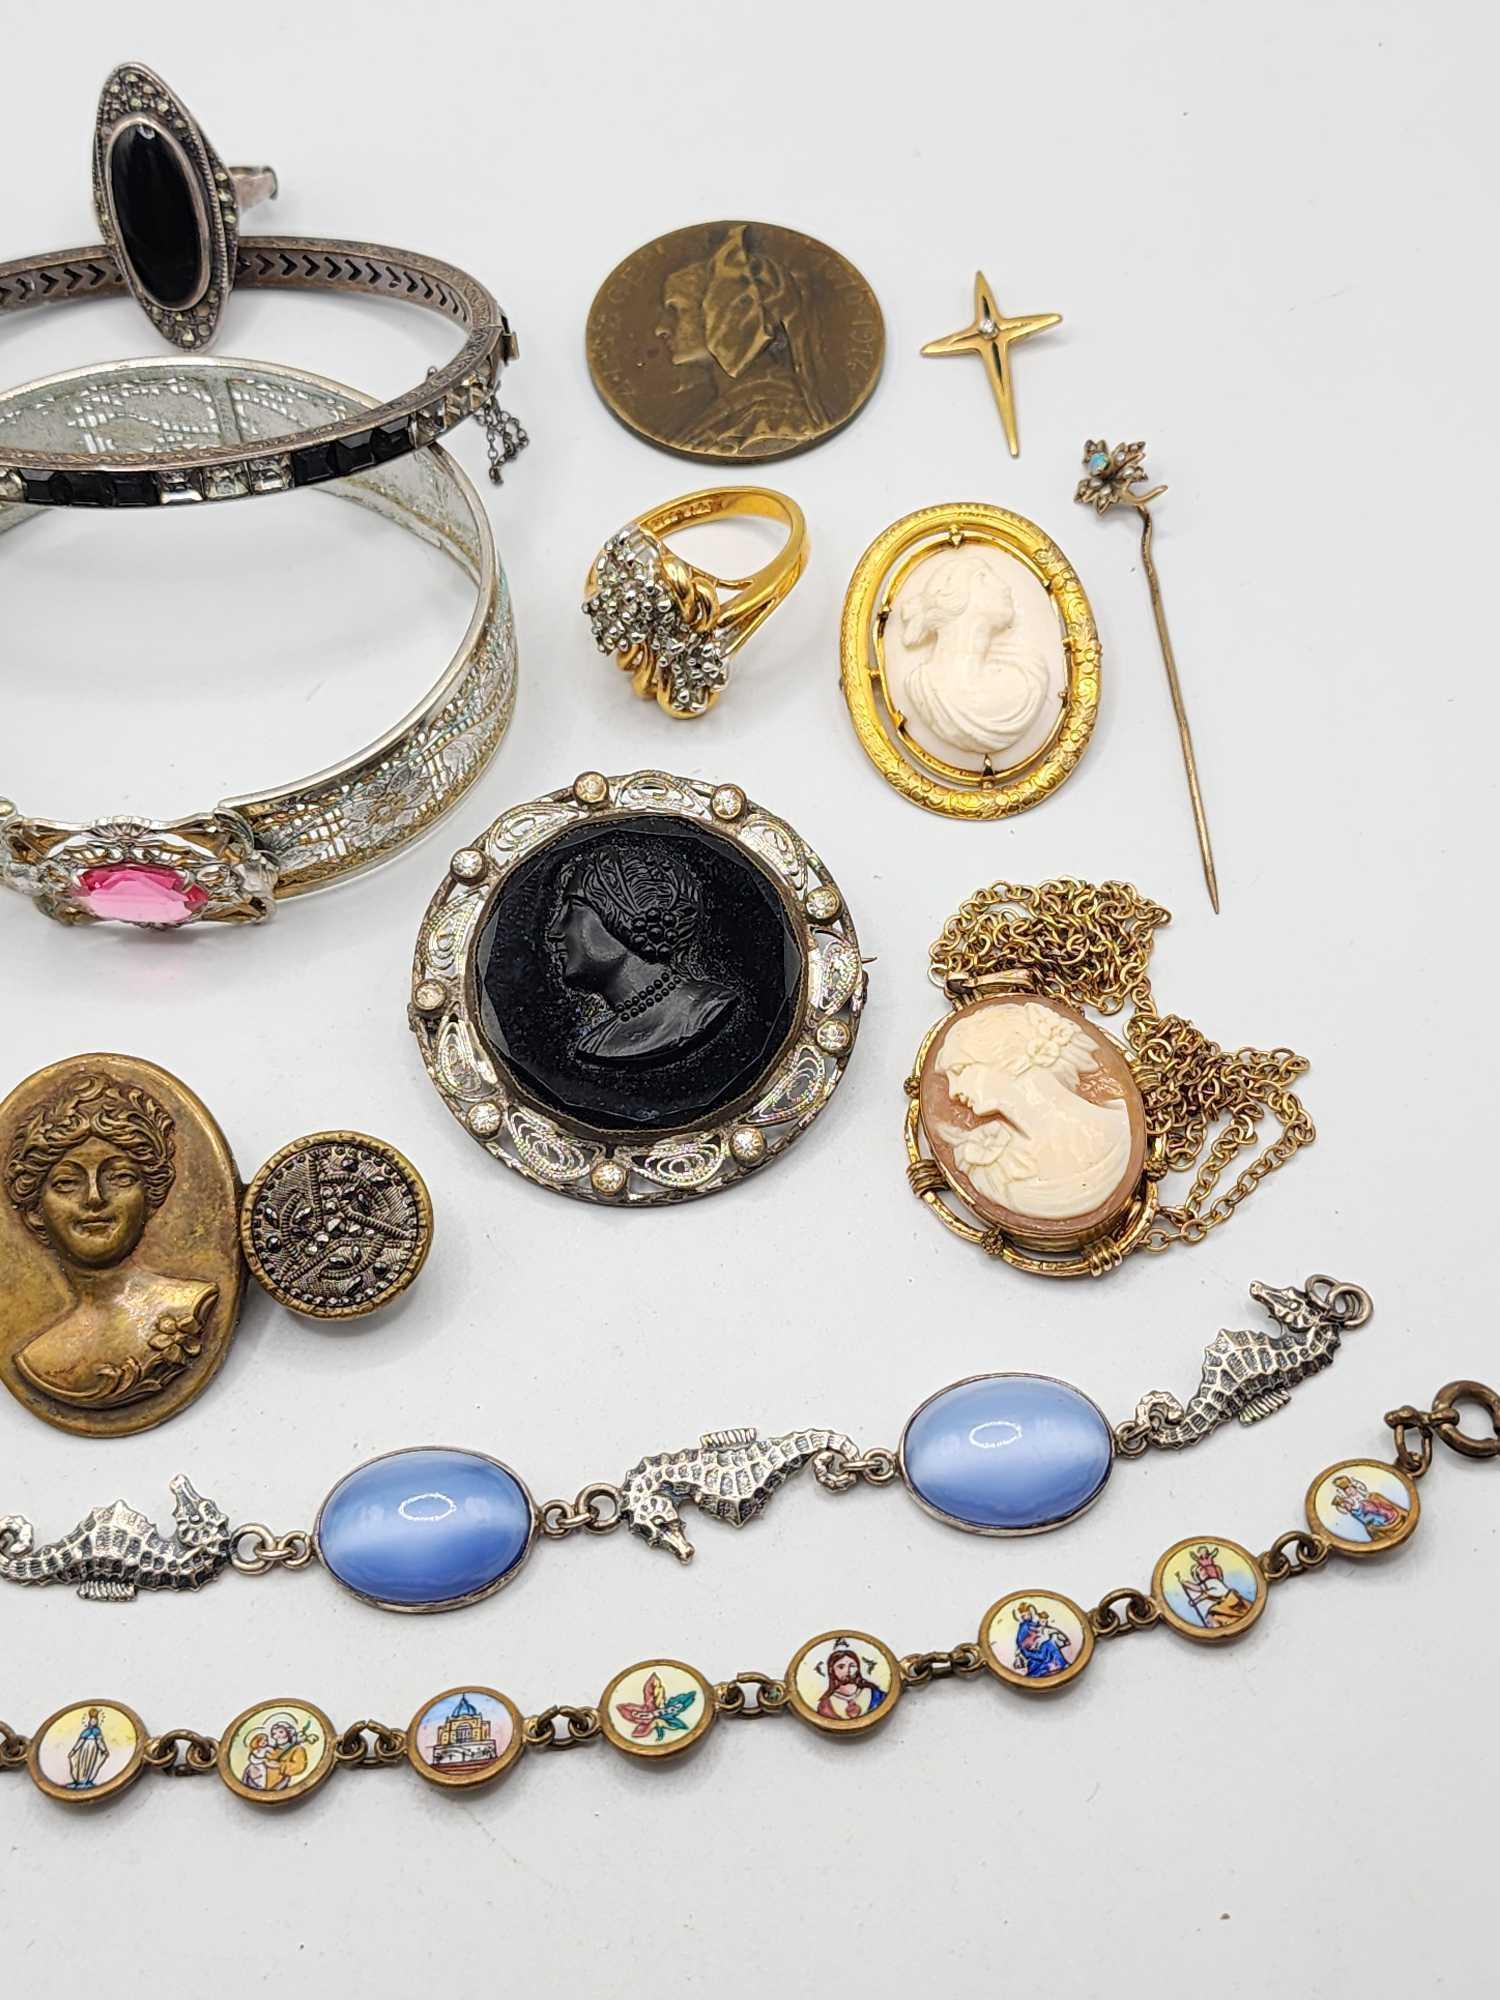 Antique Victorian jewelry: bracelets, pins, cameos